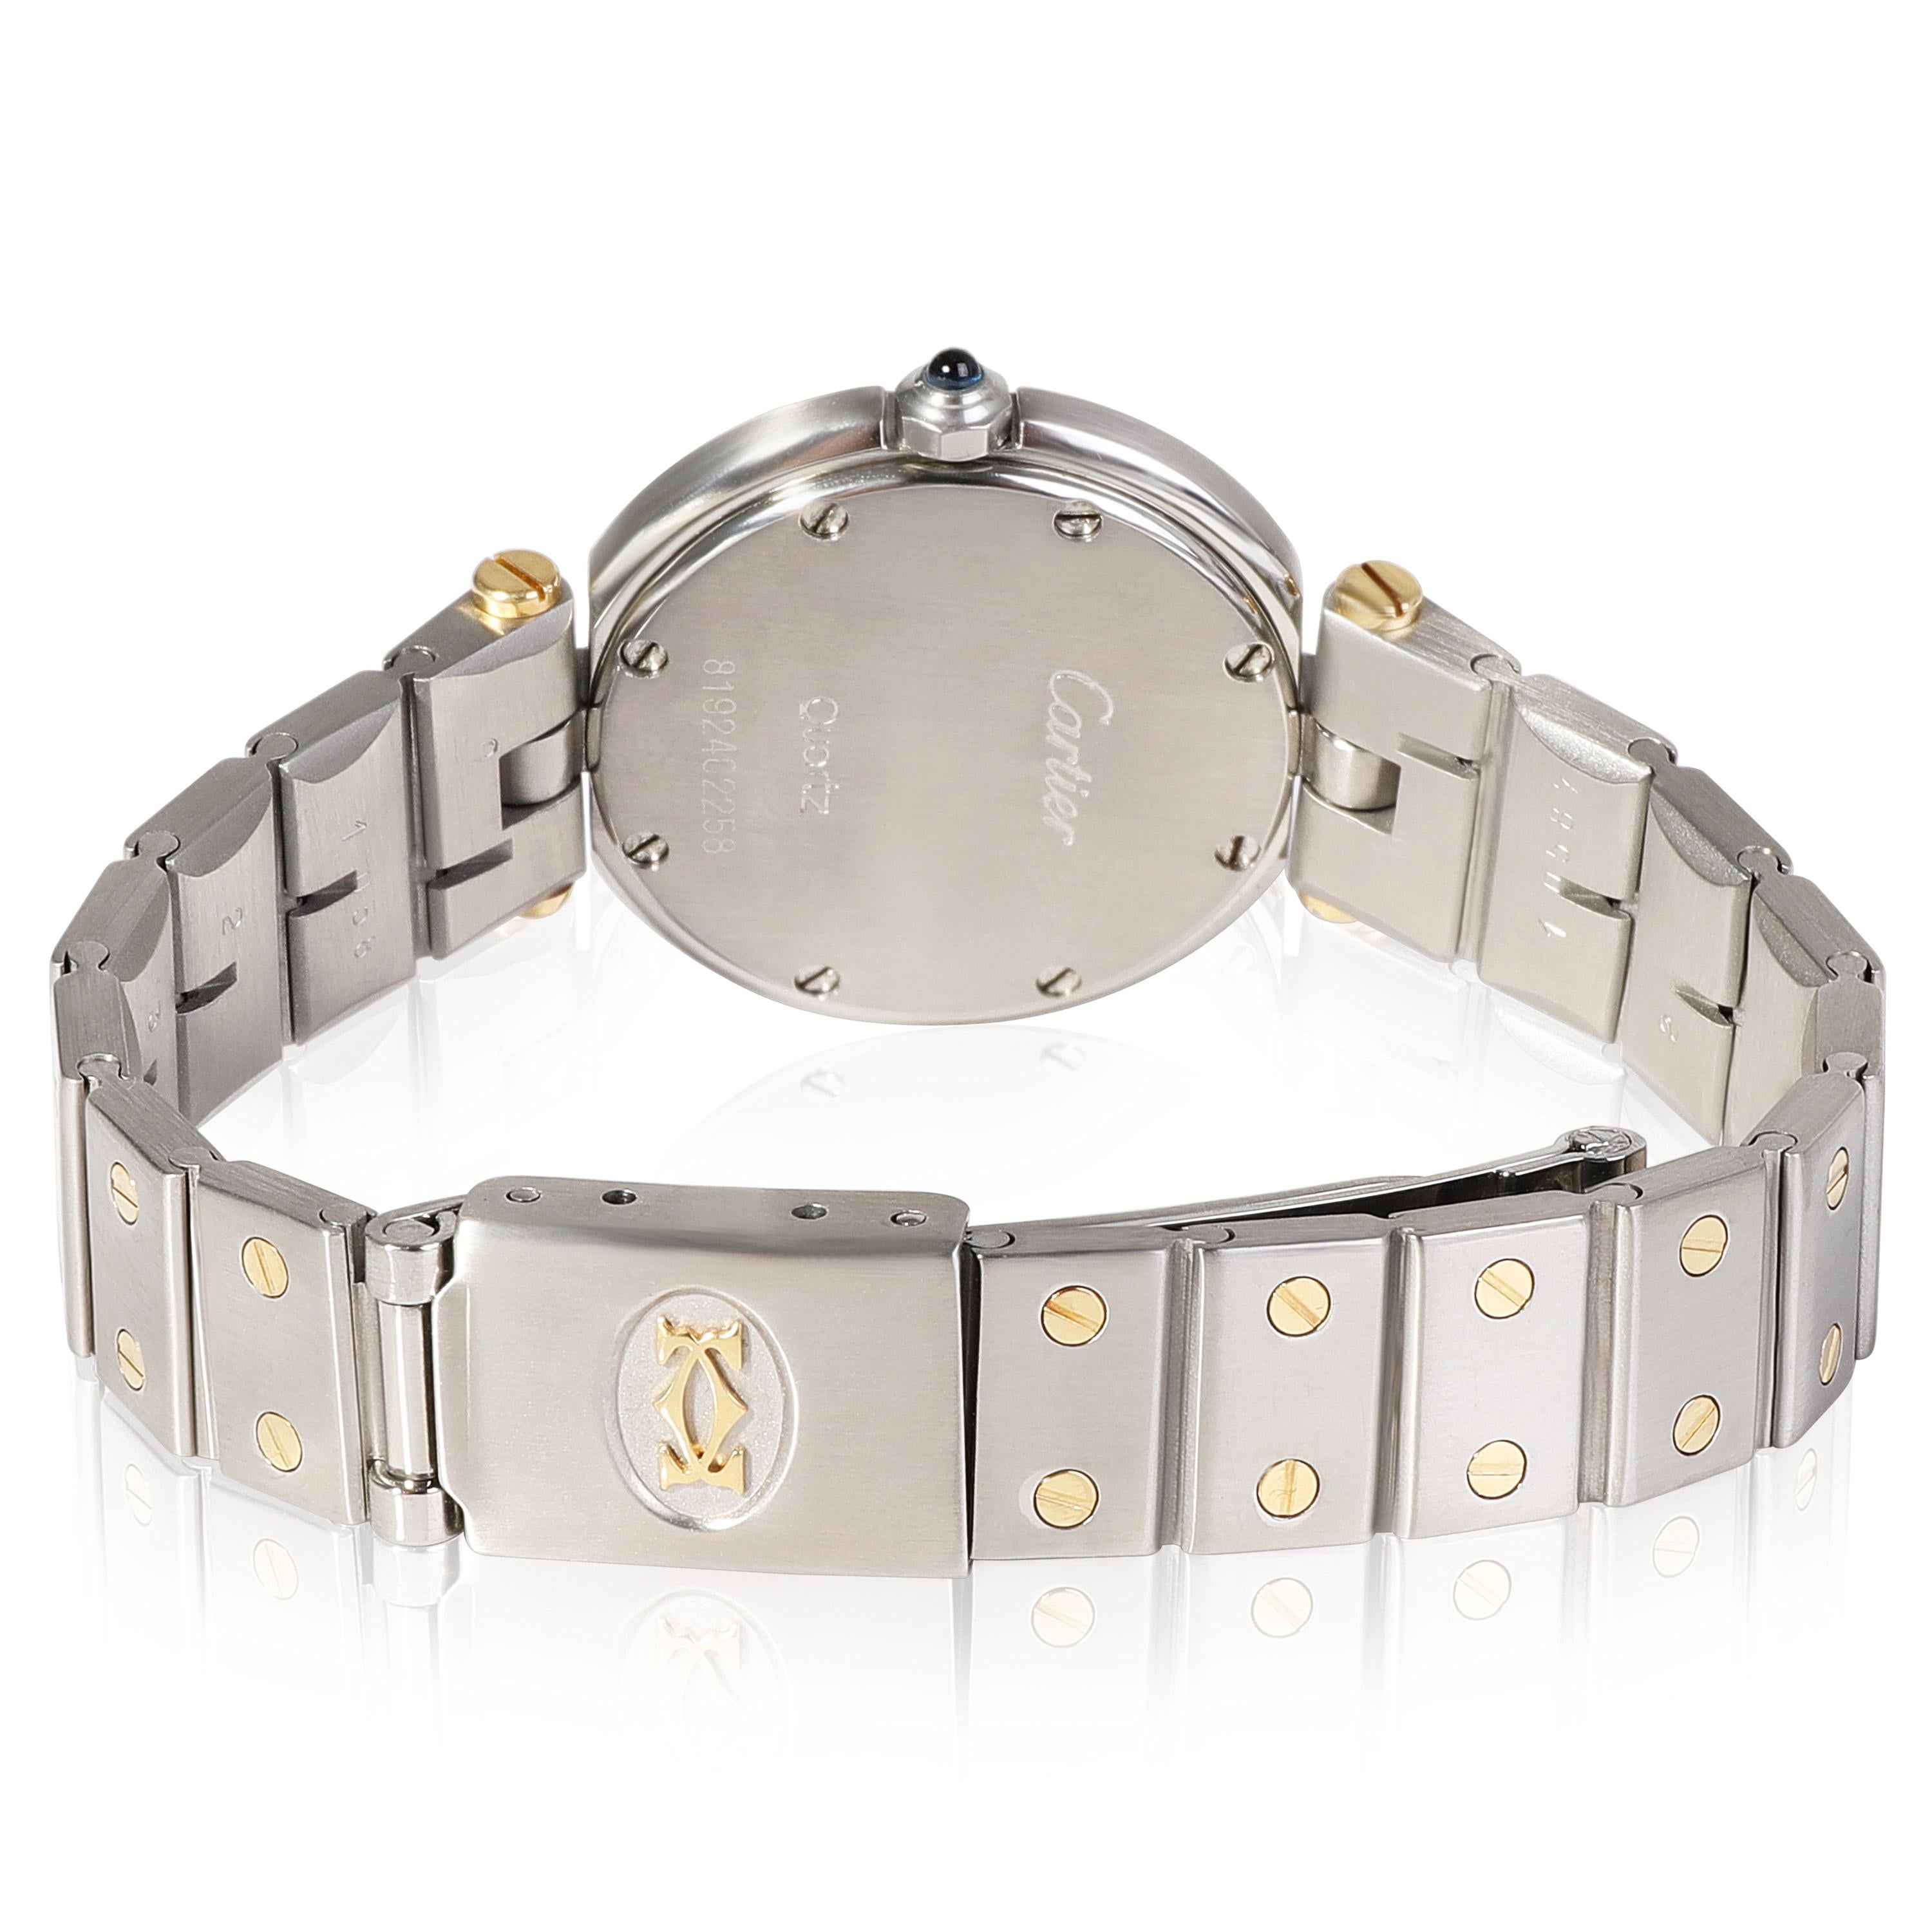 Cartier Santos Ronde 8192 Women's Watch in 18kt Stainless Steel/Yellow Gold

SKU: 115943

PRIMARY DETAILS
Brand: Cartier
Model: Santos Ronde
Country of Origin: Switzerland
Movement Type: Quartz: Battery
Year of Manufacture: 1980-1989
Condition: In